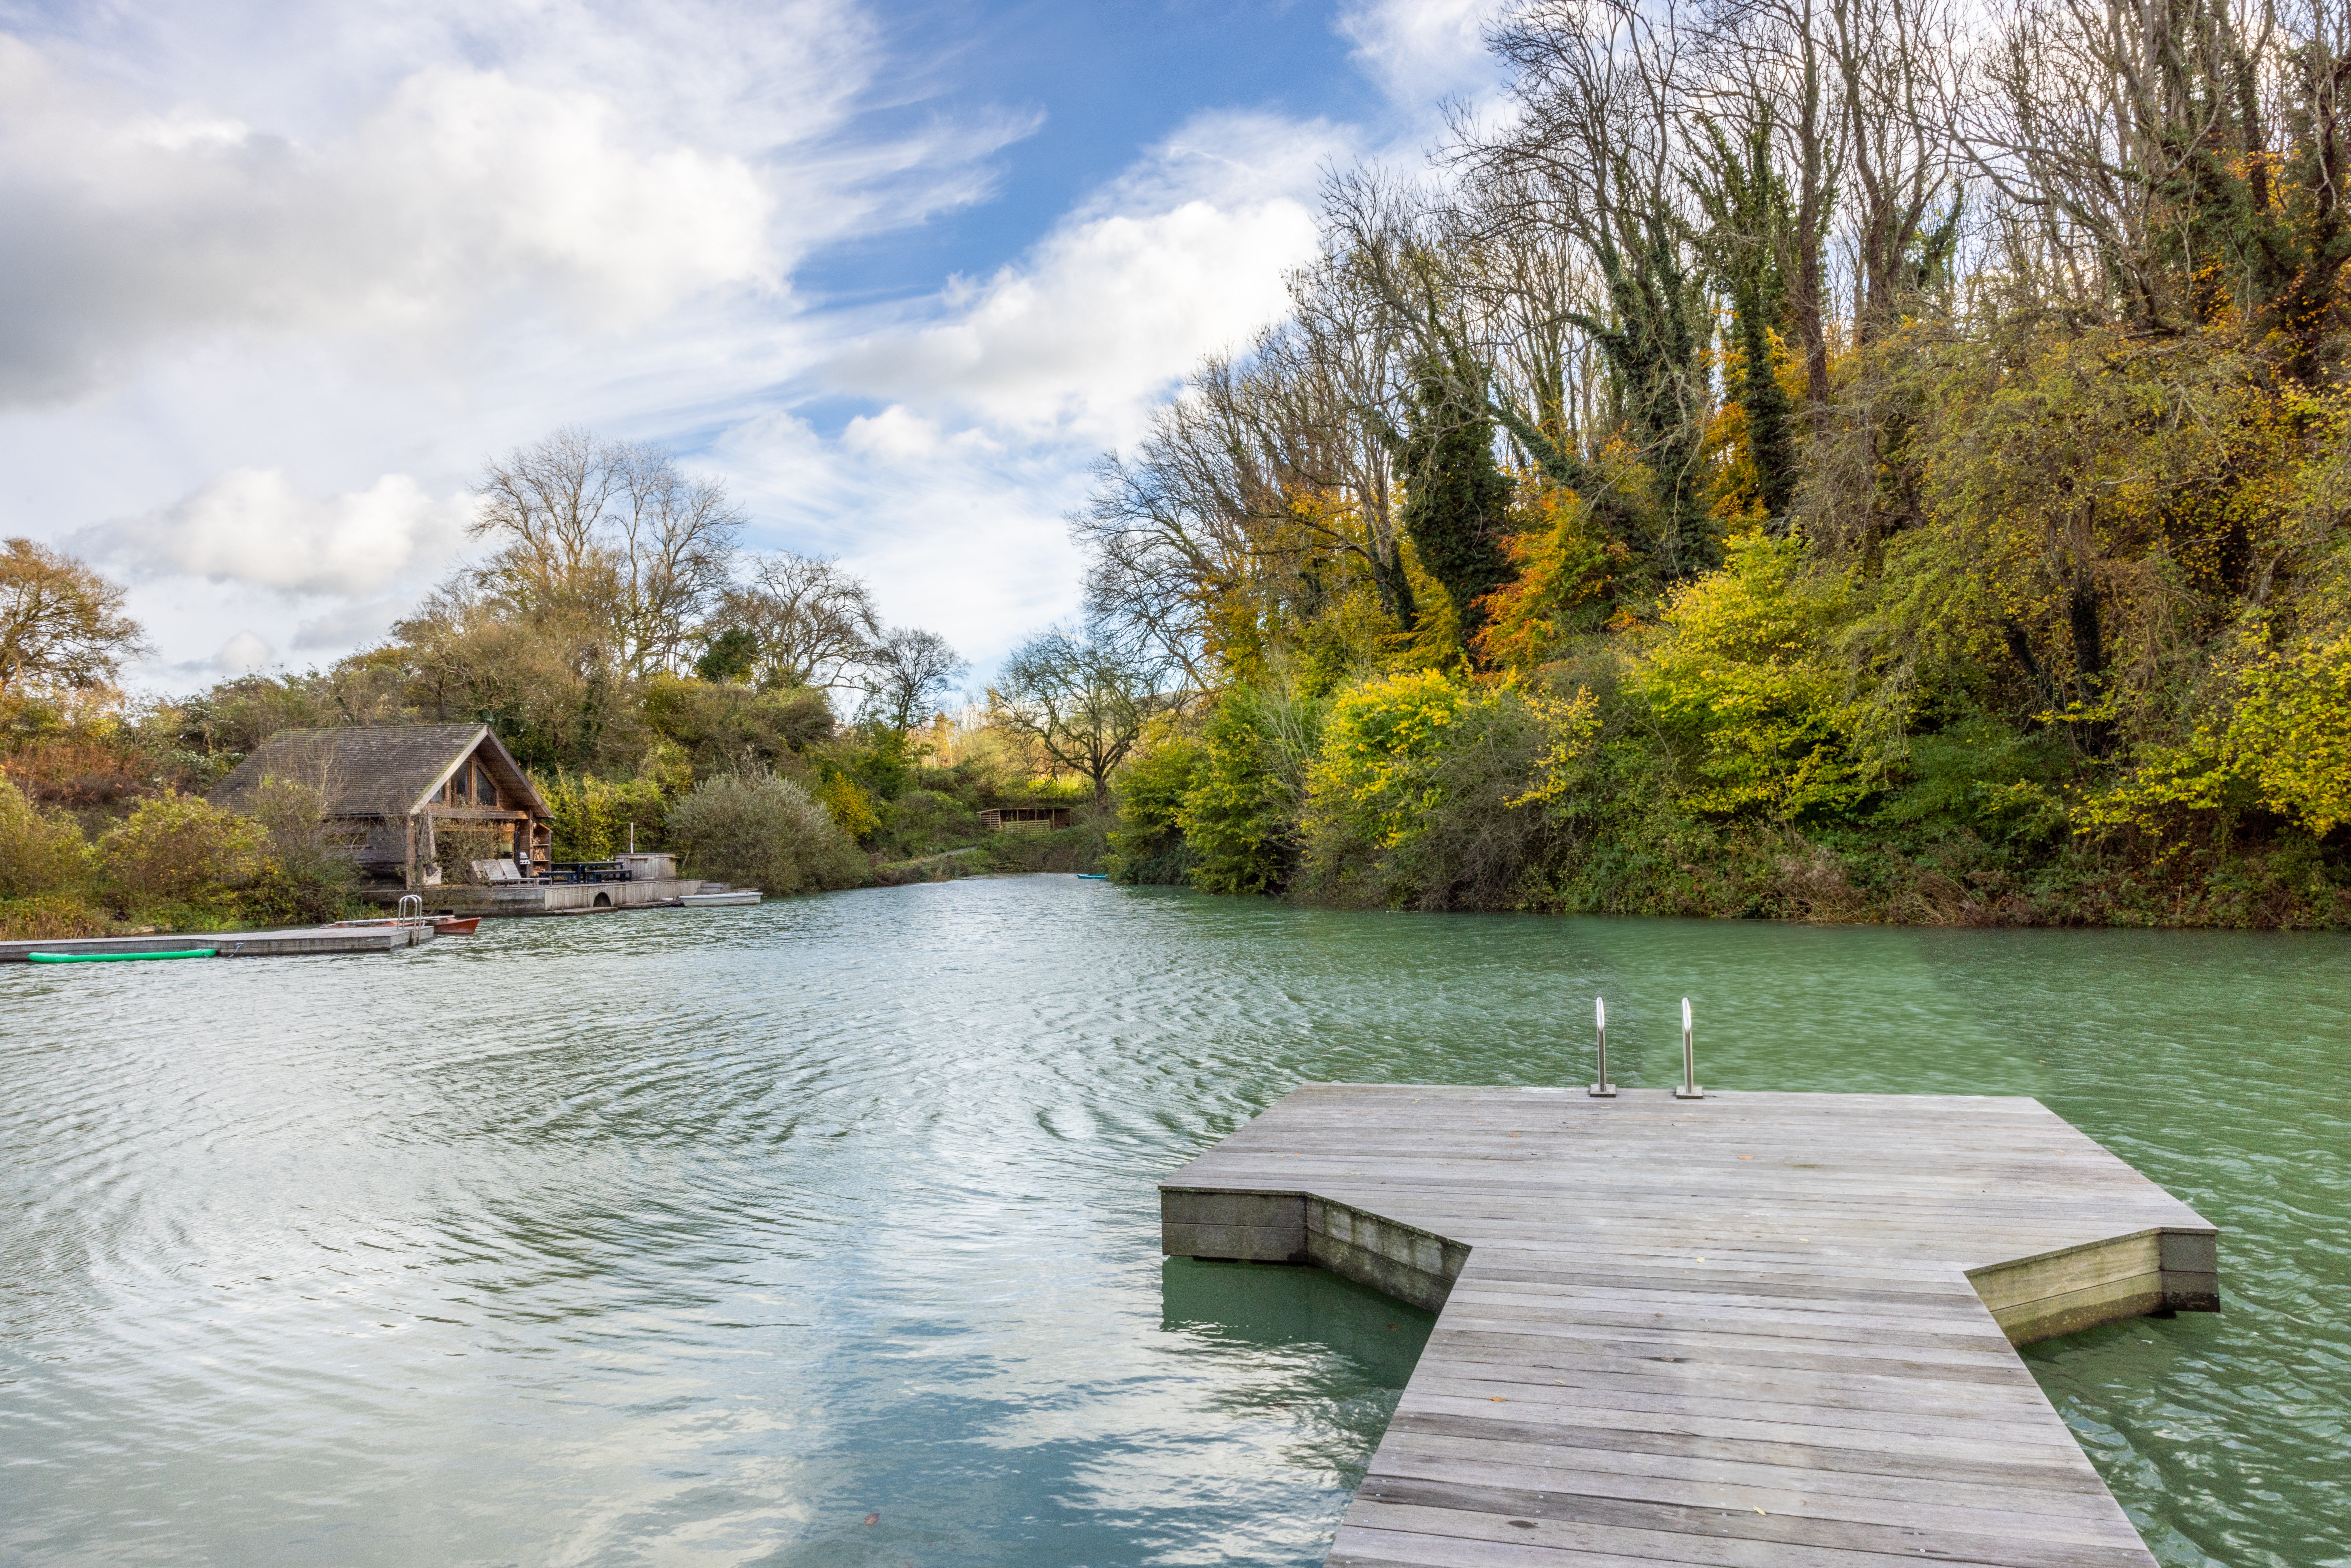 Some stays, such as Ditchling Cabin, offer their own private lakes